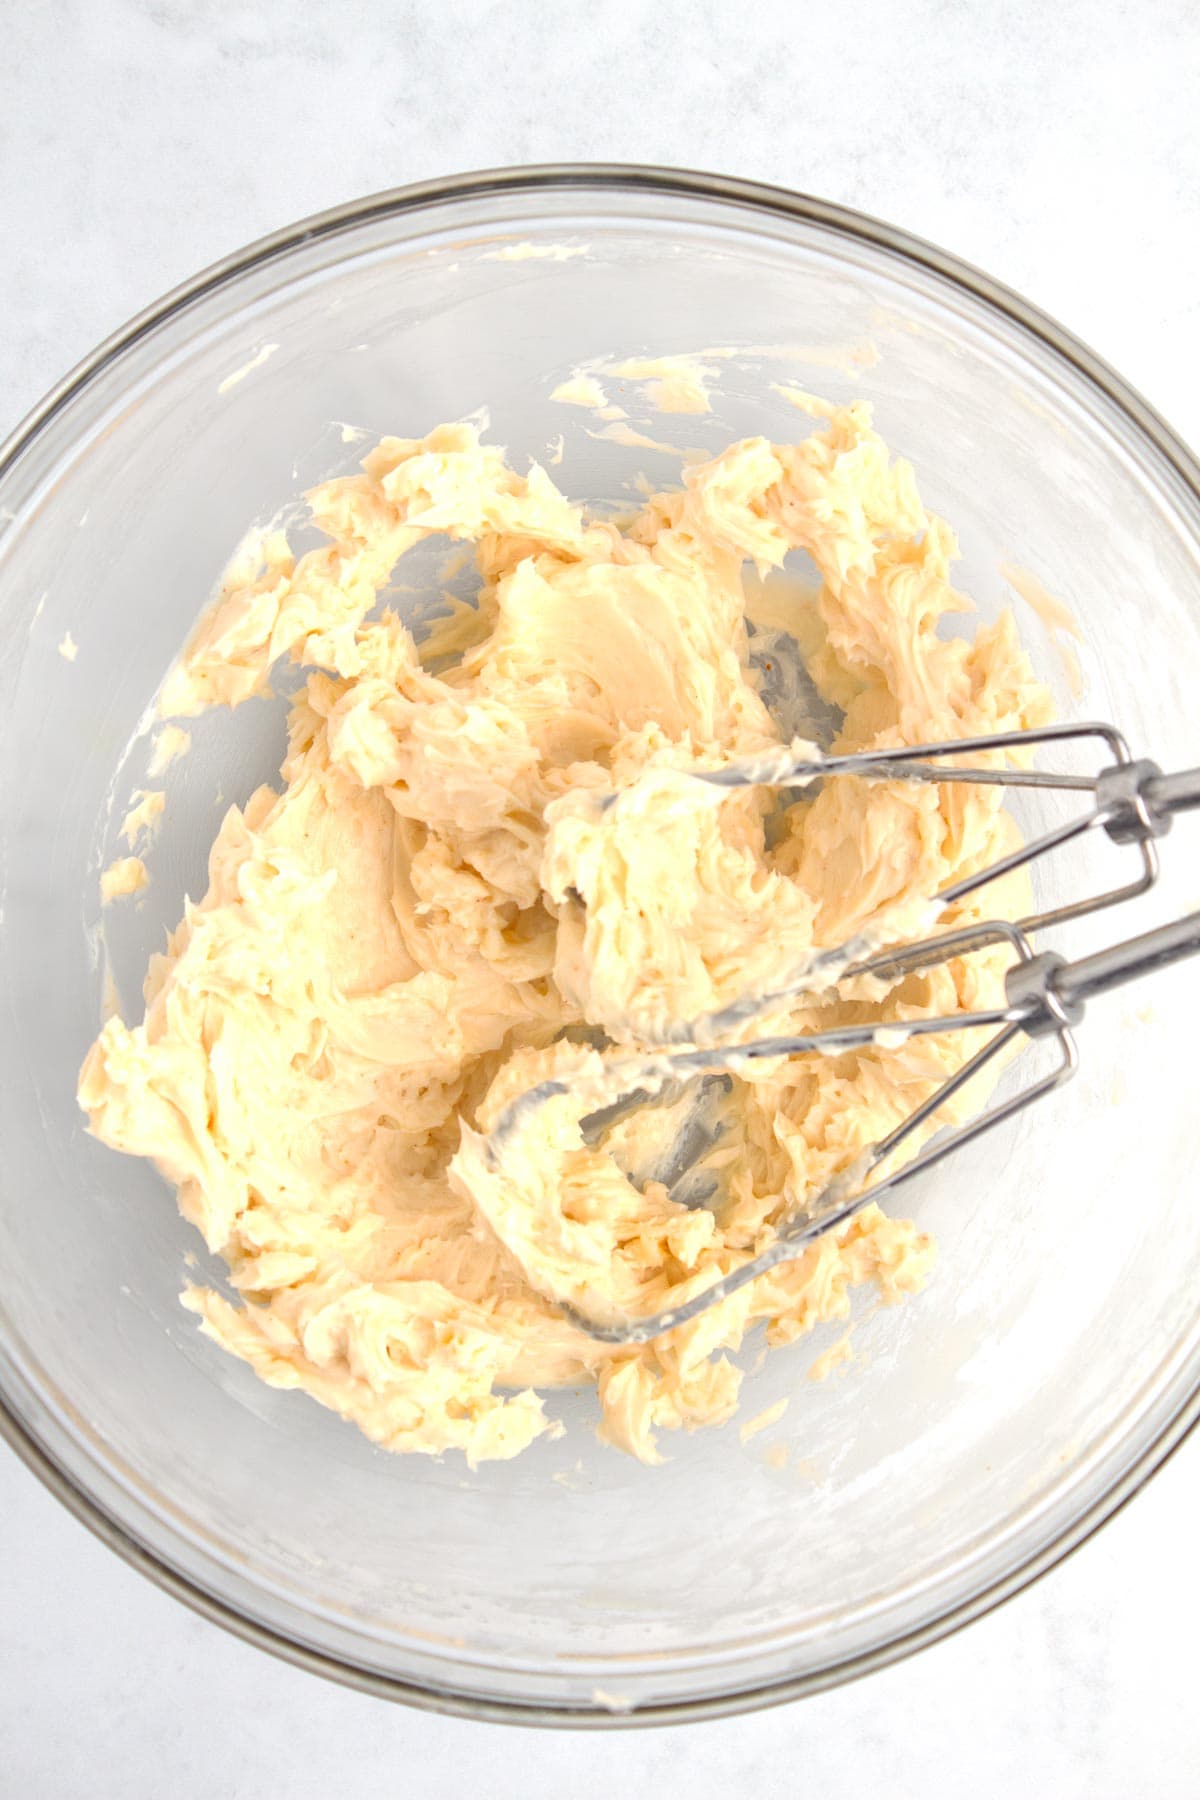 Fluffy spicy honey butter whipped with hand mixer.